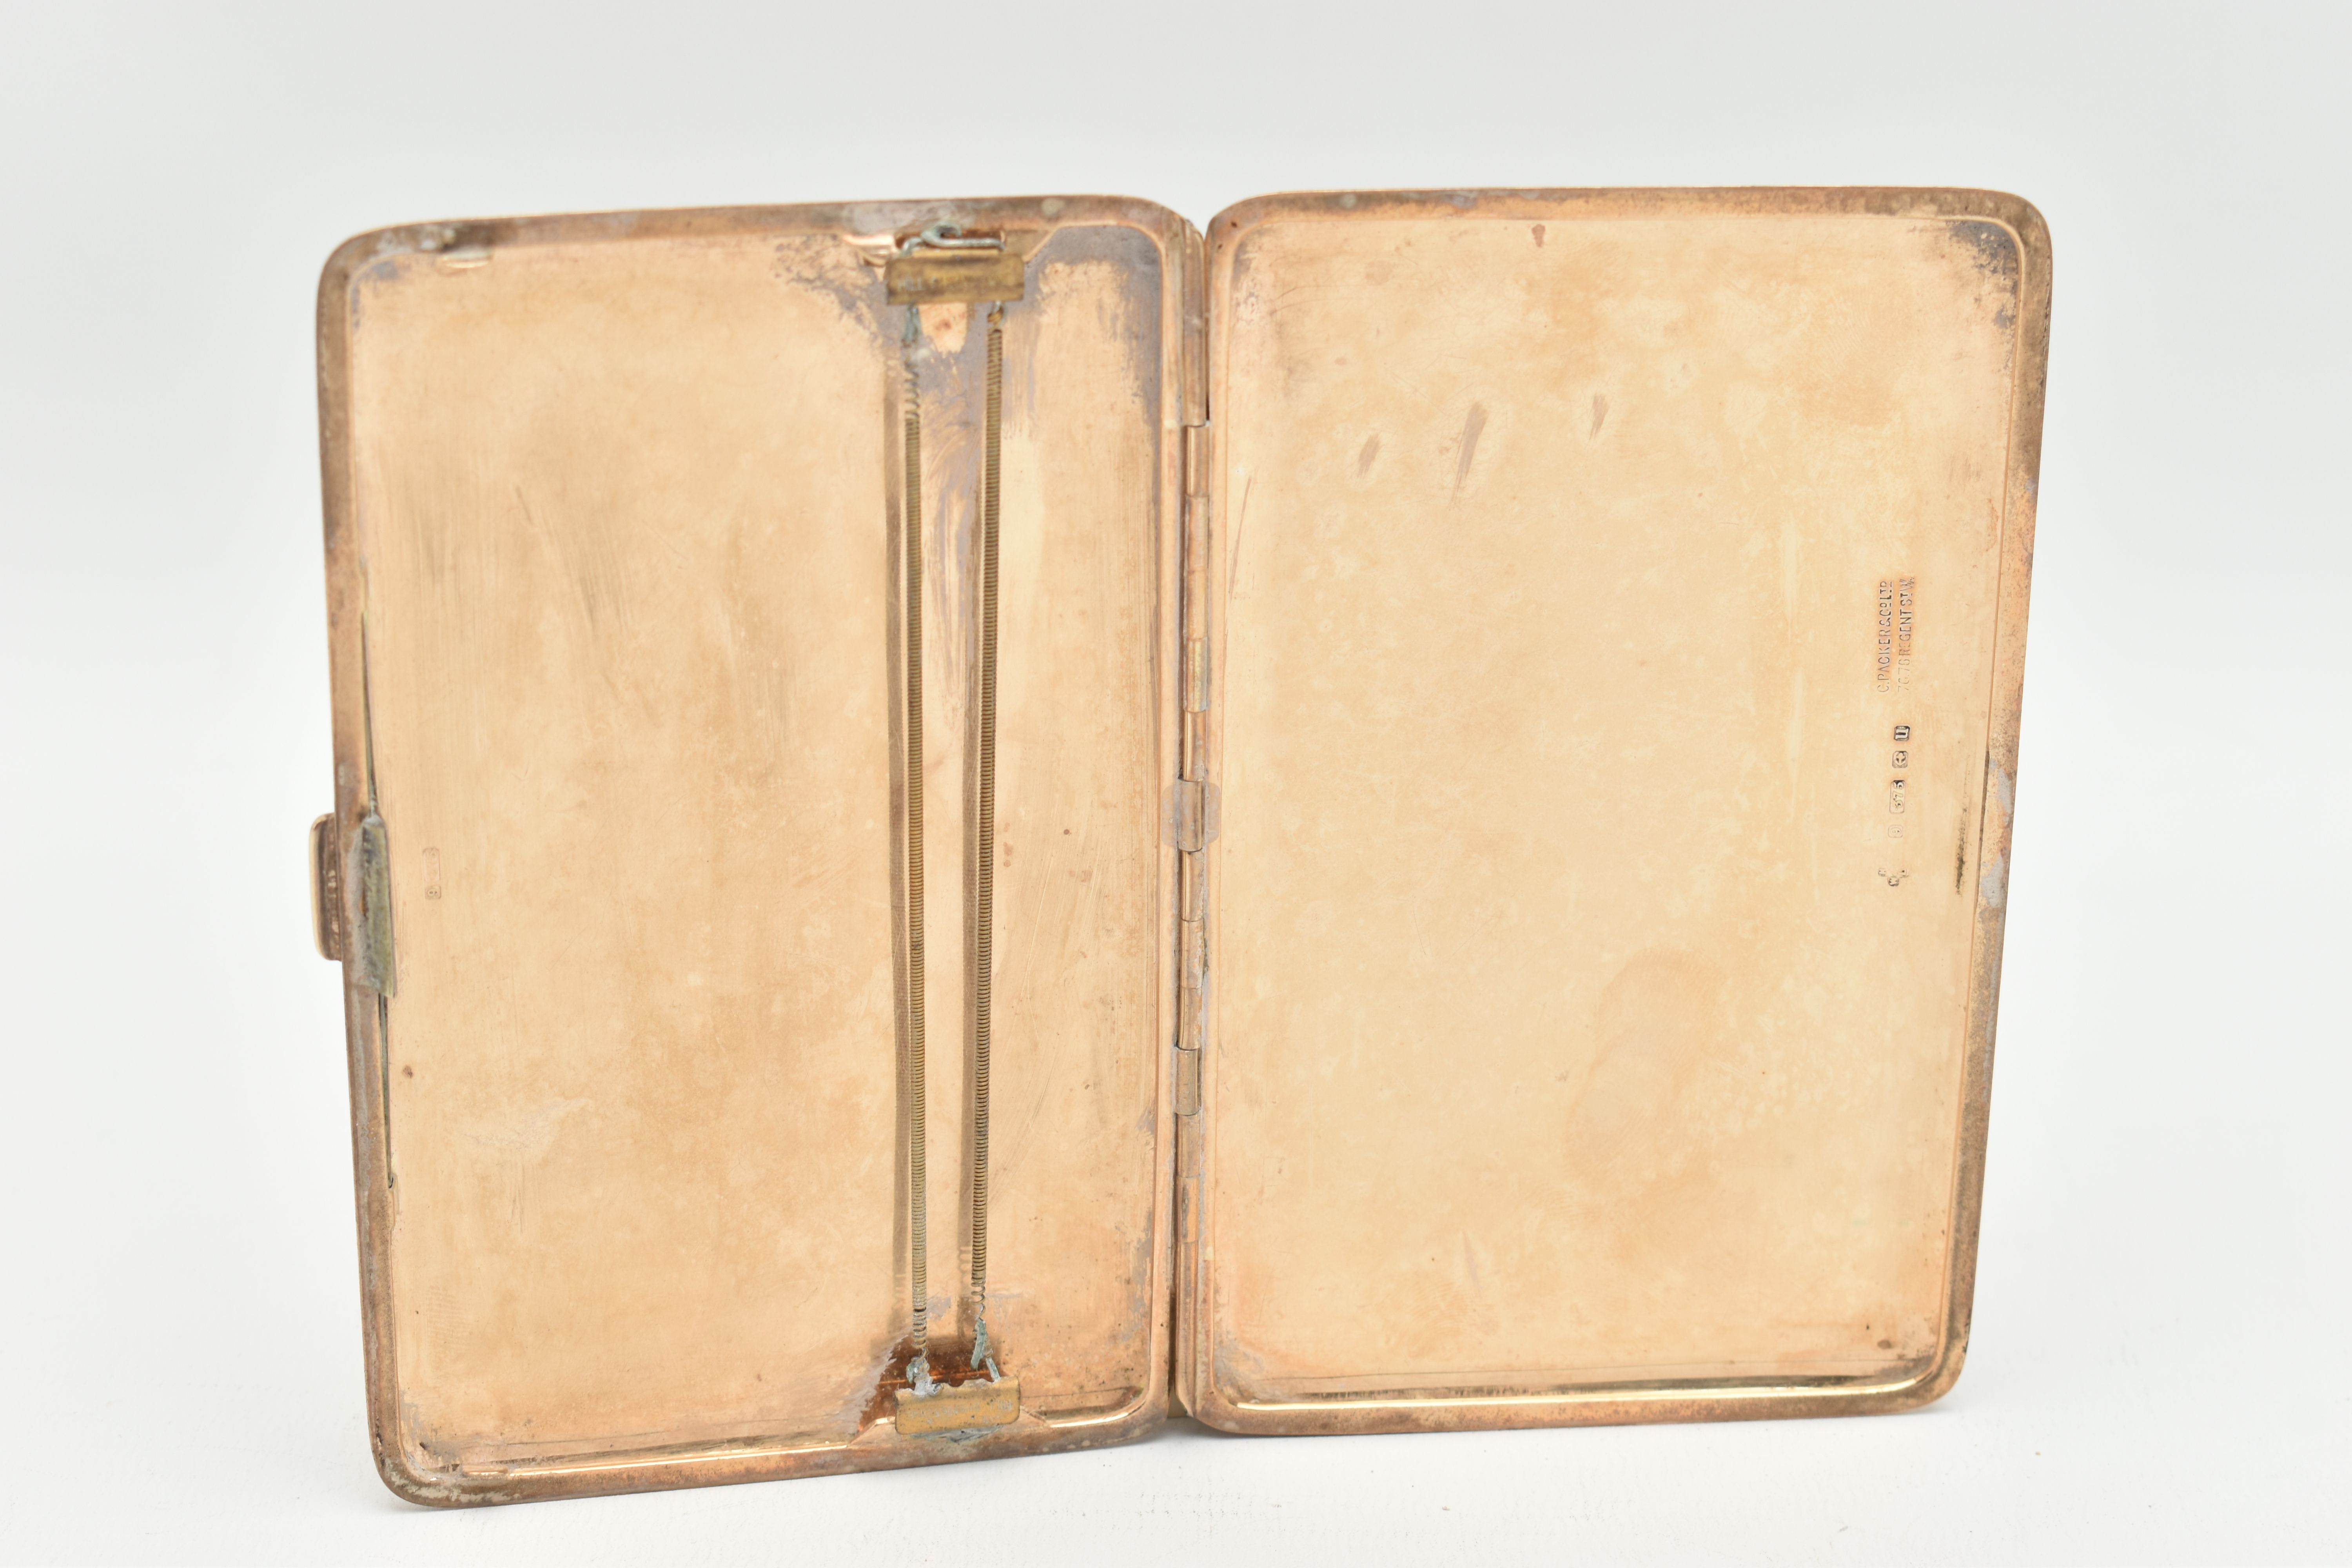 AN EARLY 20TH CENTURY, 9CT GOLD CIGARETTE CASE, of a rectangular form, polished design with - Image 5 of 6